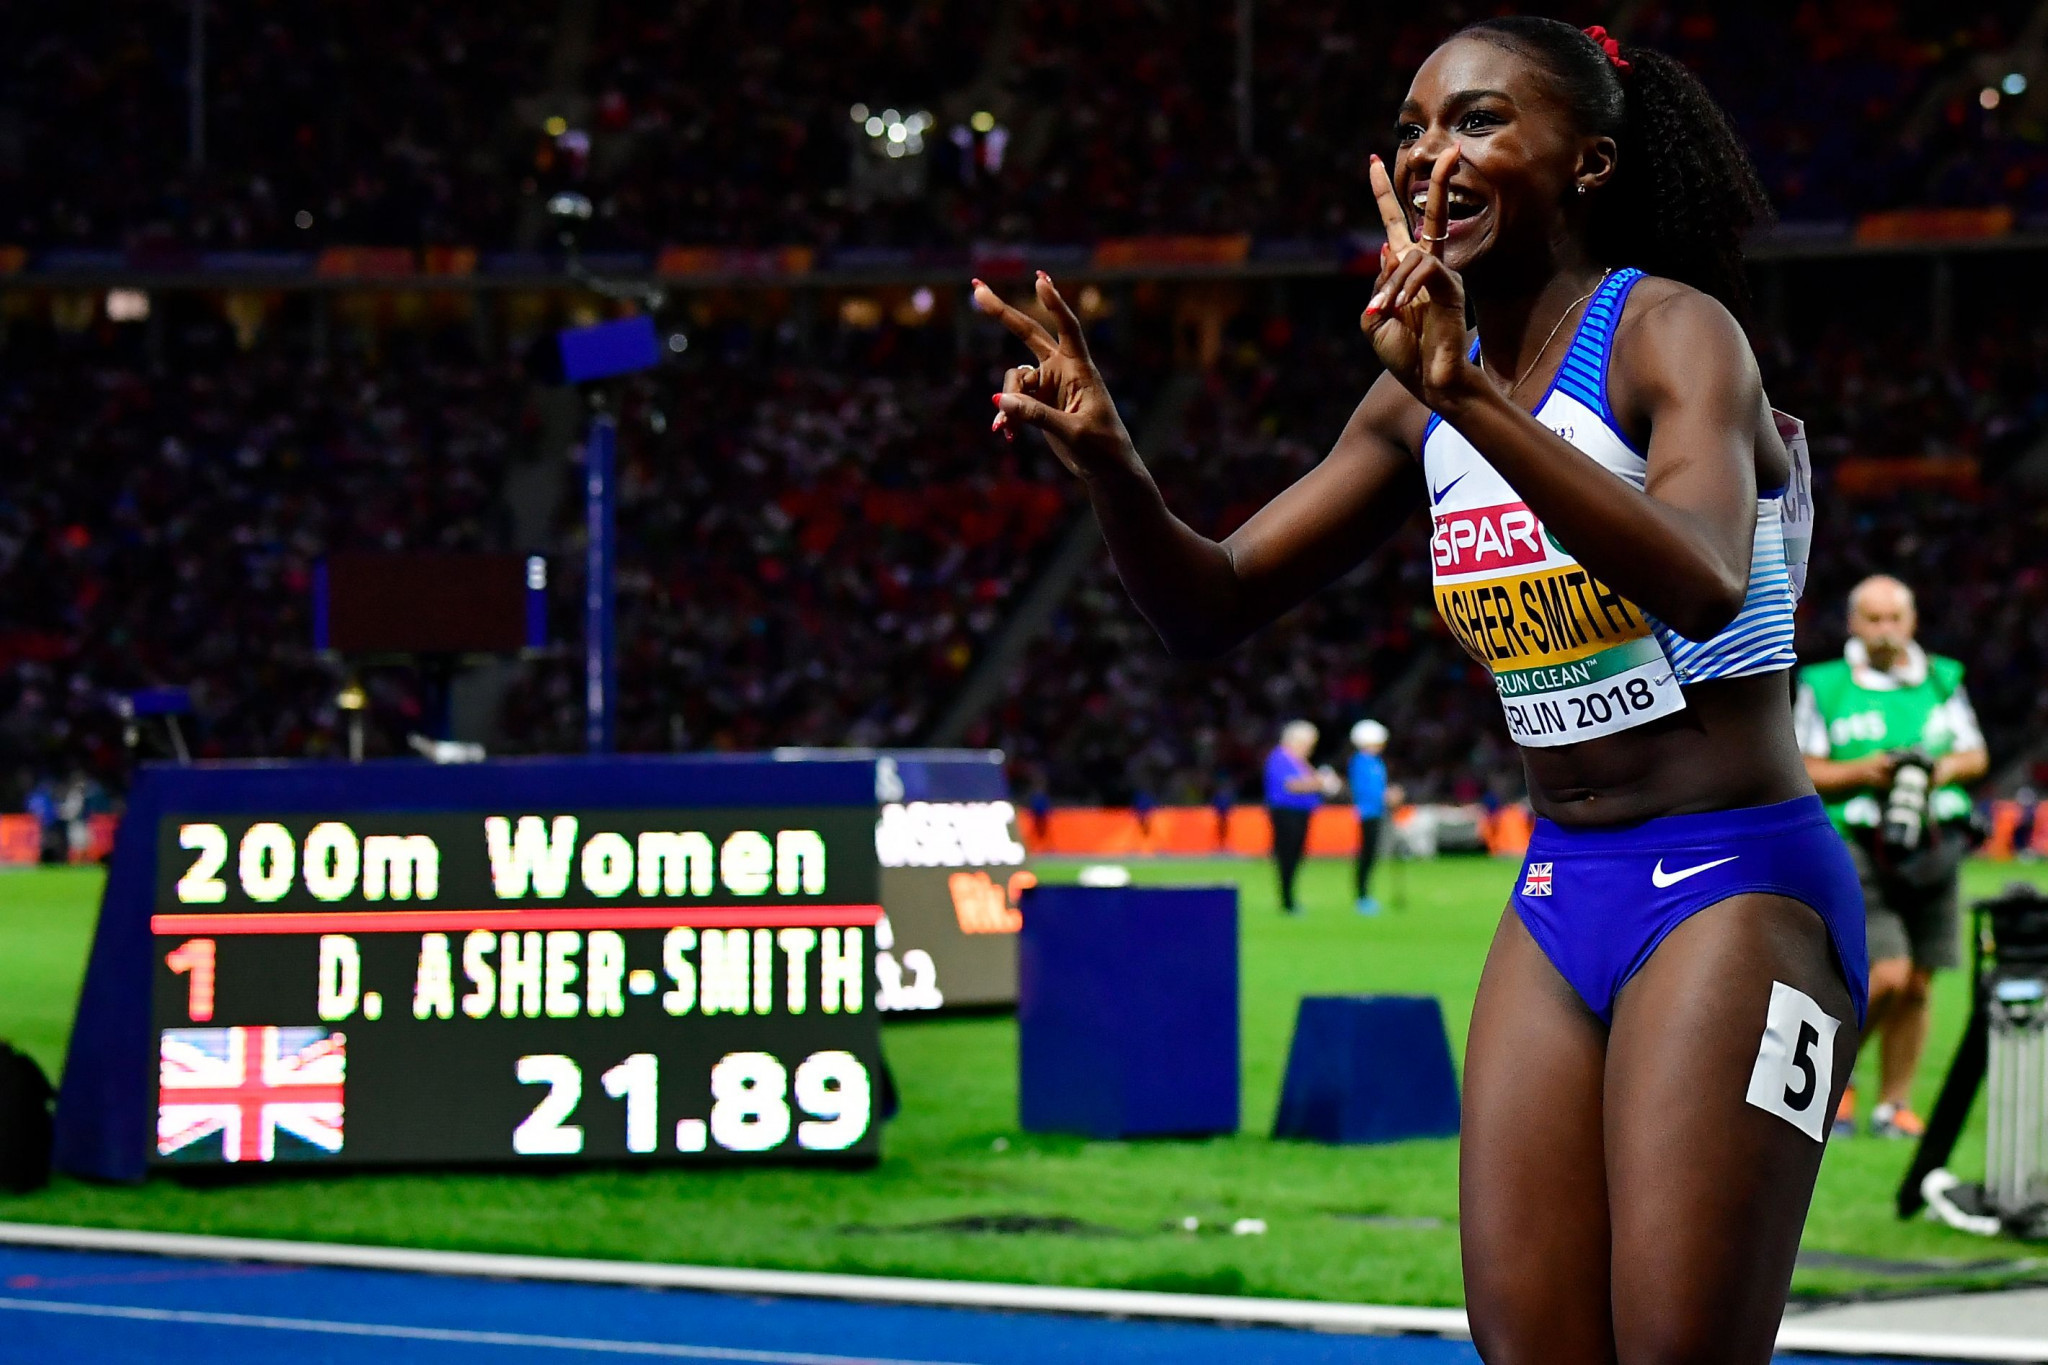 British athlete Dina Asher-Smith won the sprint triple crown in Berlin, taking the 100m, 200m and 4x100m relay ©Getty Images